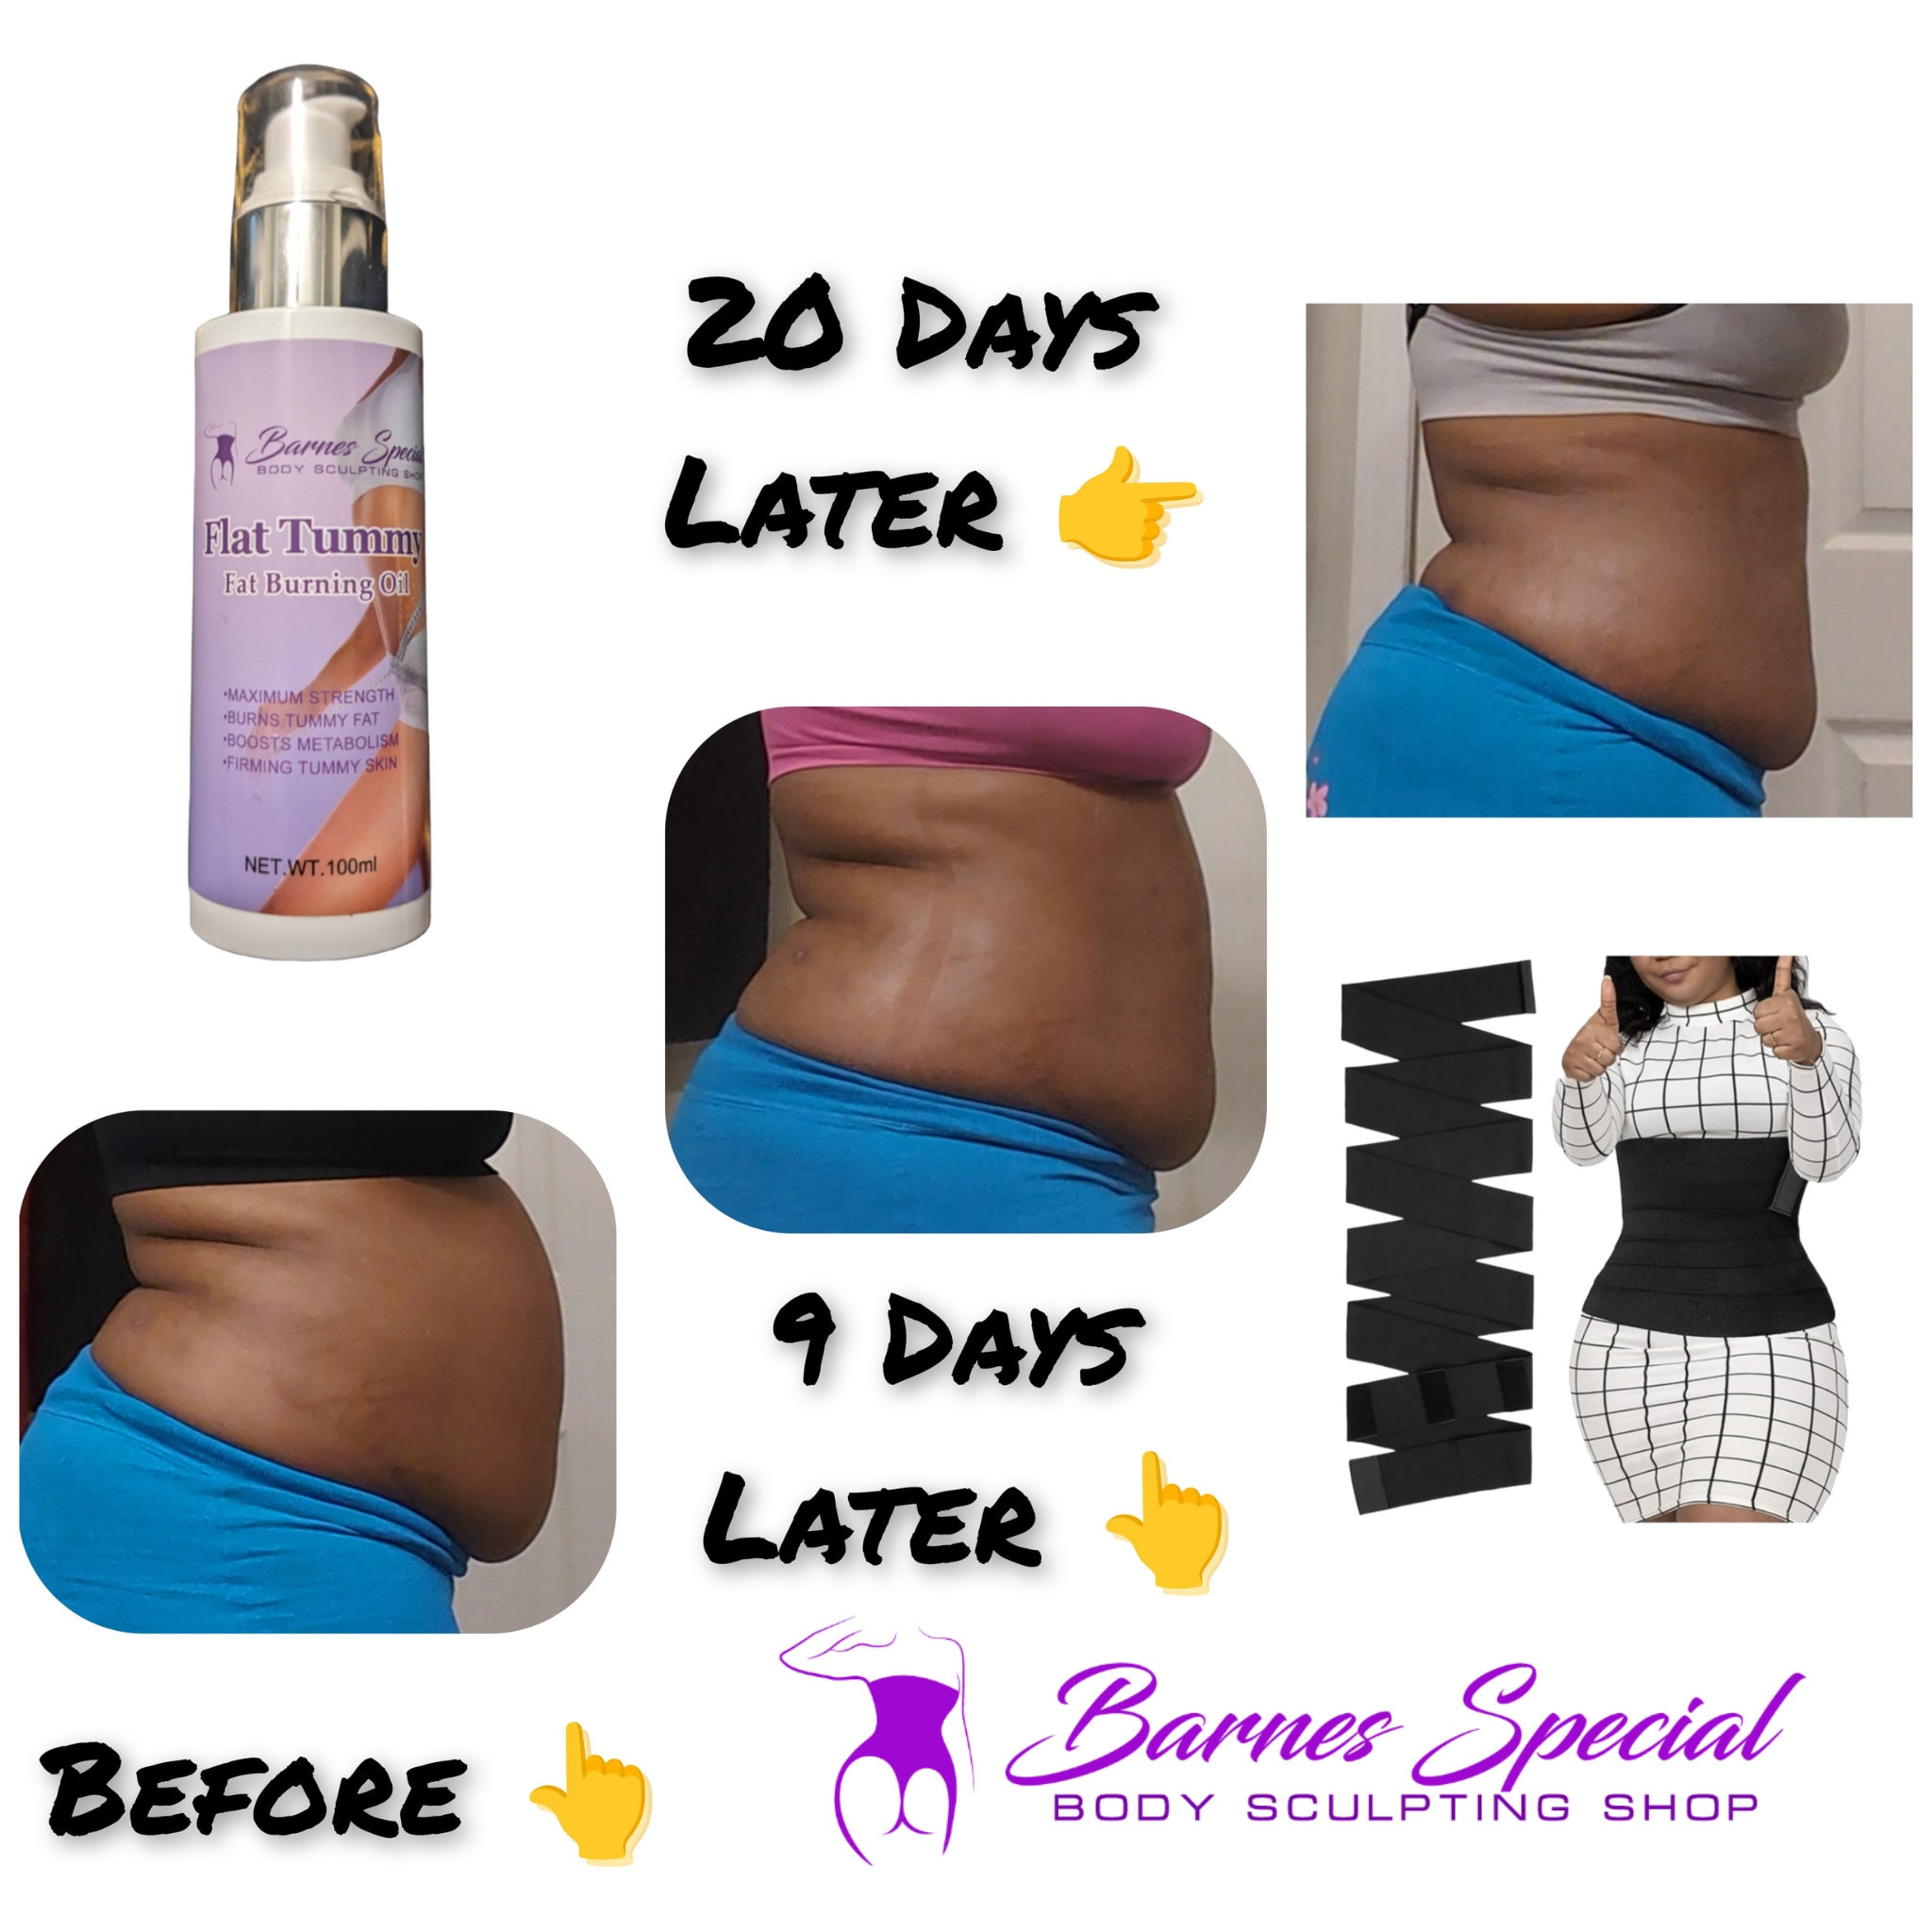 Adjustable Slimming Belly Wrap (with FREE 8oz Flatbelly Tea)